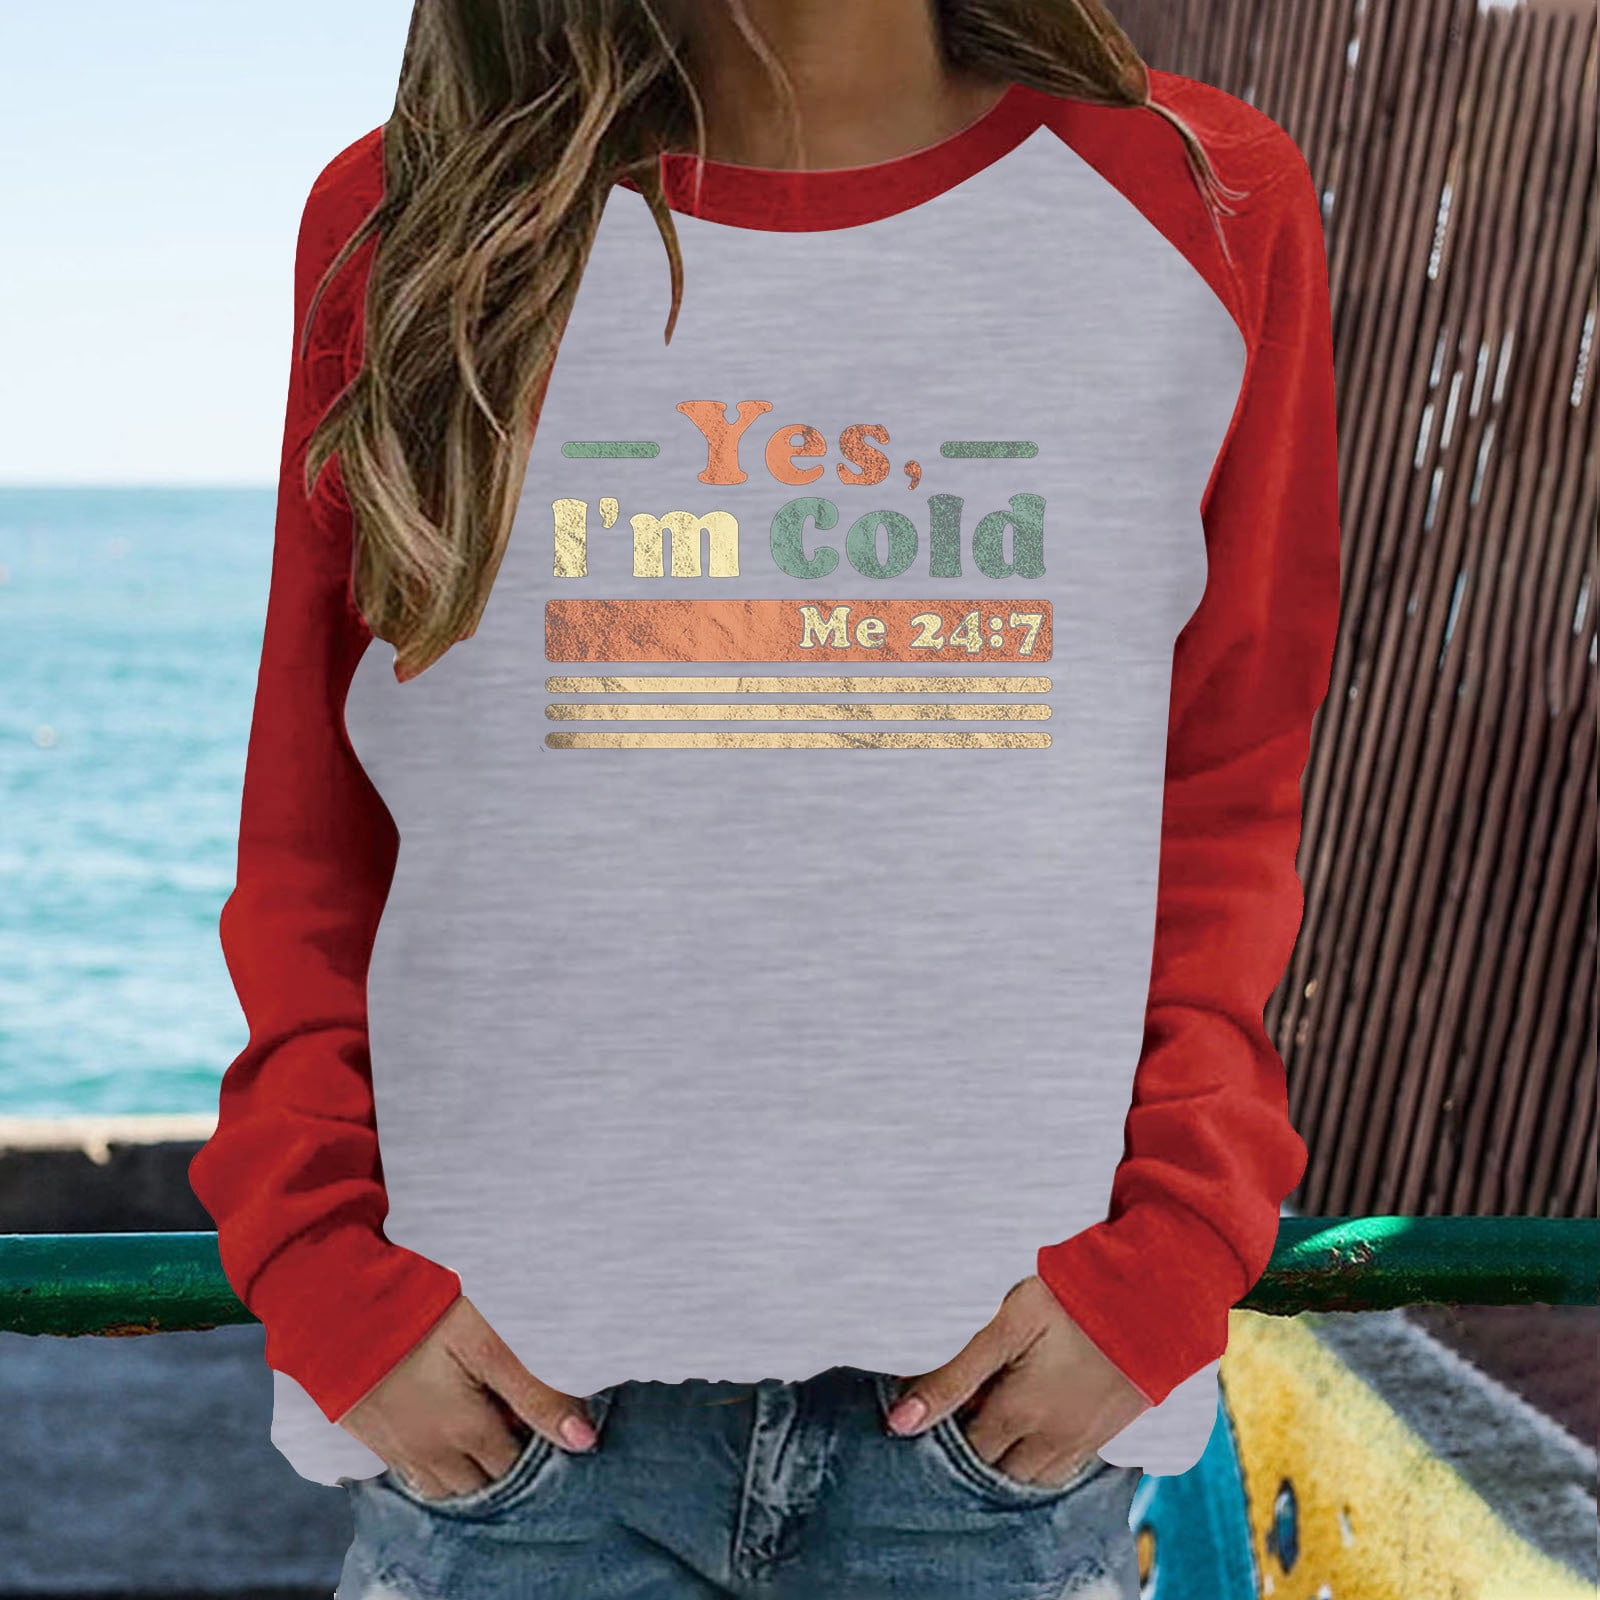 amidoa Women's S Vintage Pullover Sweatshirts Graphic Tops Shirts Yes Im  Cold Me :7 Sweatshirt  Cute Funny Winter Clothes